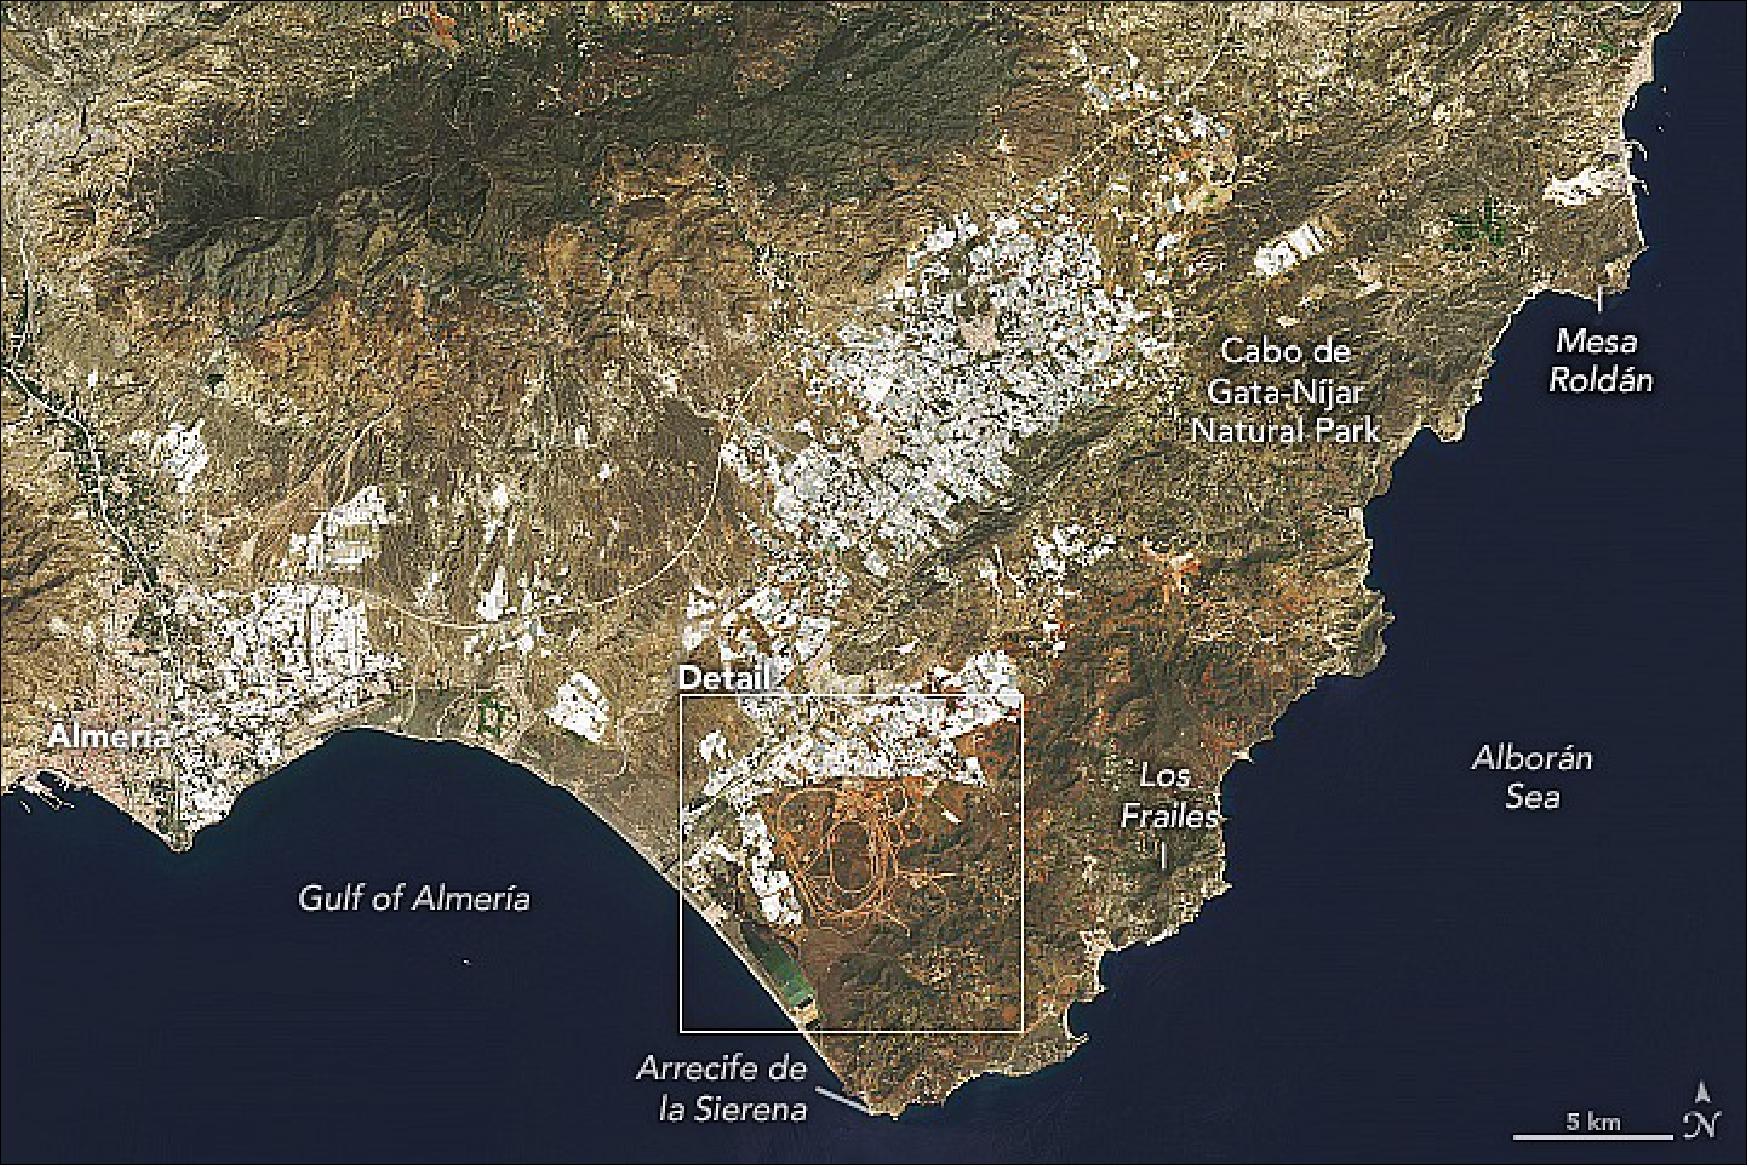 Figure 25: The OLI-2 instrument on Landsat-9 acquired this image on May 17, 2022. The wide view shows the city of Almería on the coast of Andalusia. The Tabernas Desert lies to the north, in the rain shadow of a mountain ridge, and Cabo de Gata-Níjar Natural Park is to the east along the coast of the Alborán Sea. (image credit: NASA Earth Observatory images by Lauren Dauphin, using Landsat data from the U.S. Geological Survey. Story by Kathryn Hansen)